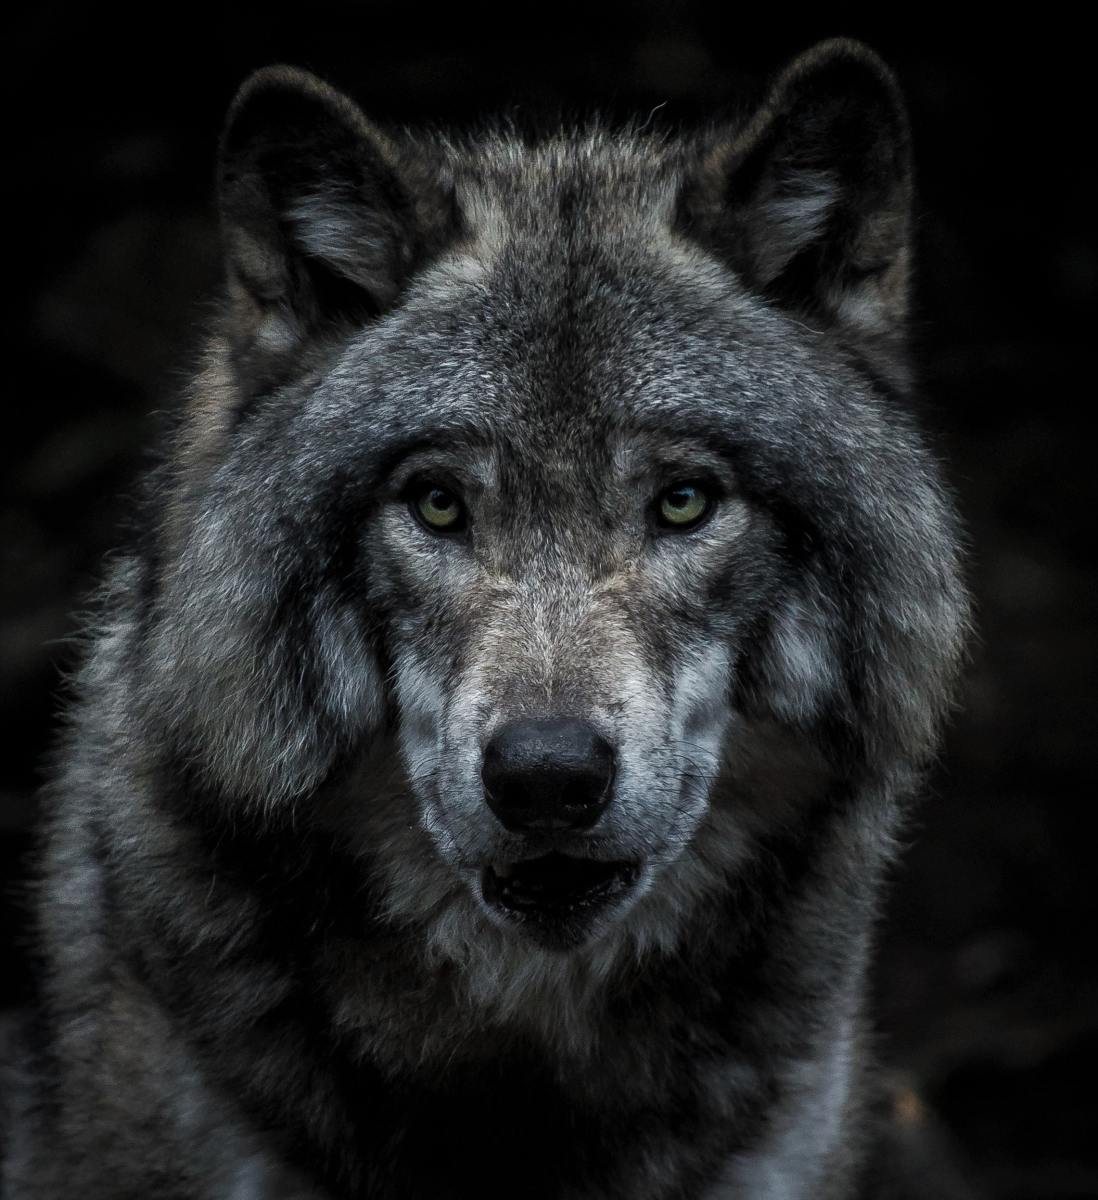 In Apache, the noble name "Nantan Lupan" means "grey wolf". 